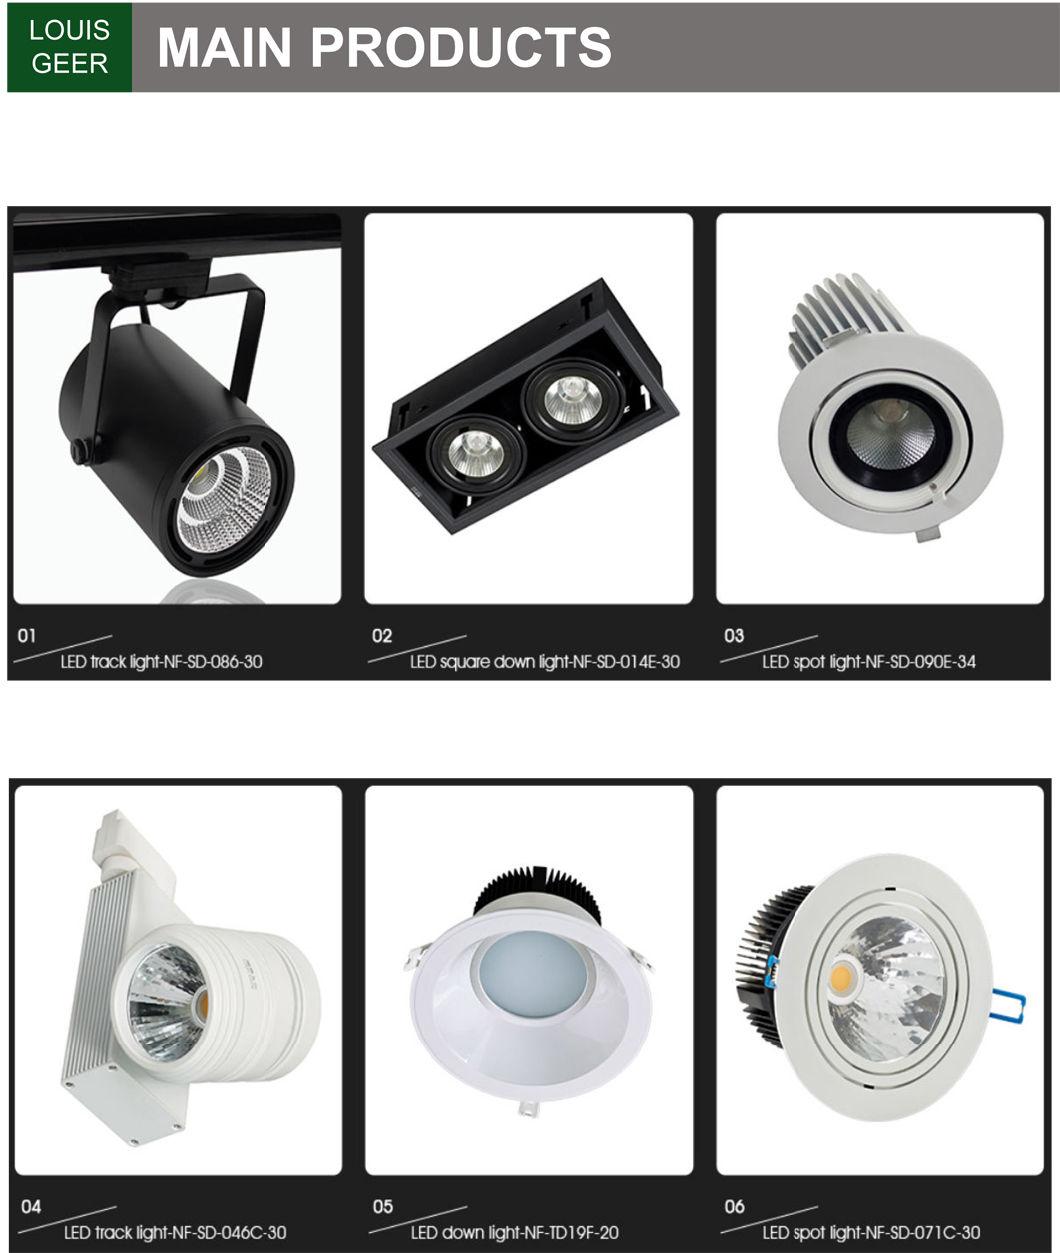 Factory Direct Supply Convenient Installation Rail Track System 30W 35W LED Magnetic Track Rail Light